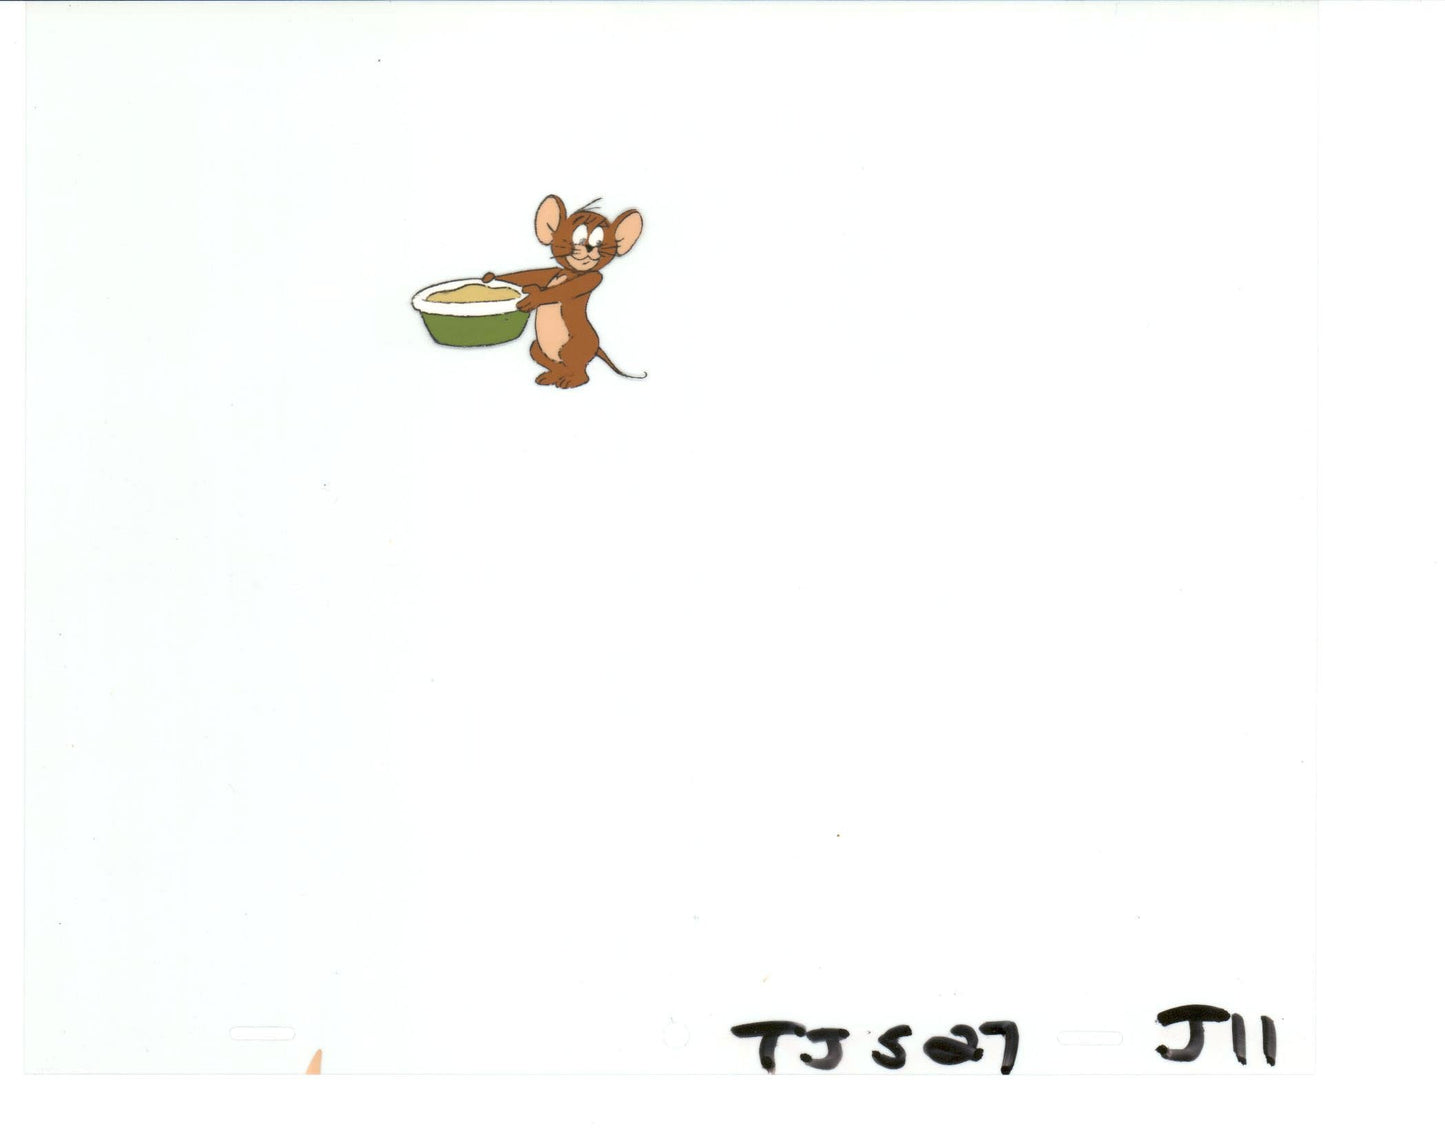 Tom & Jerry Original Production Animation Cel from Filmation 1980-82 b4542